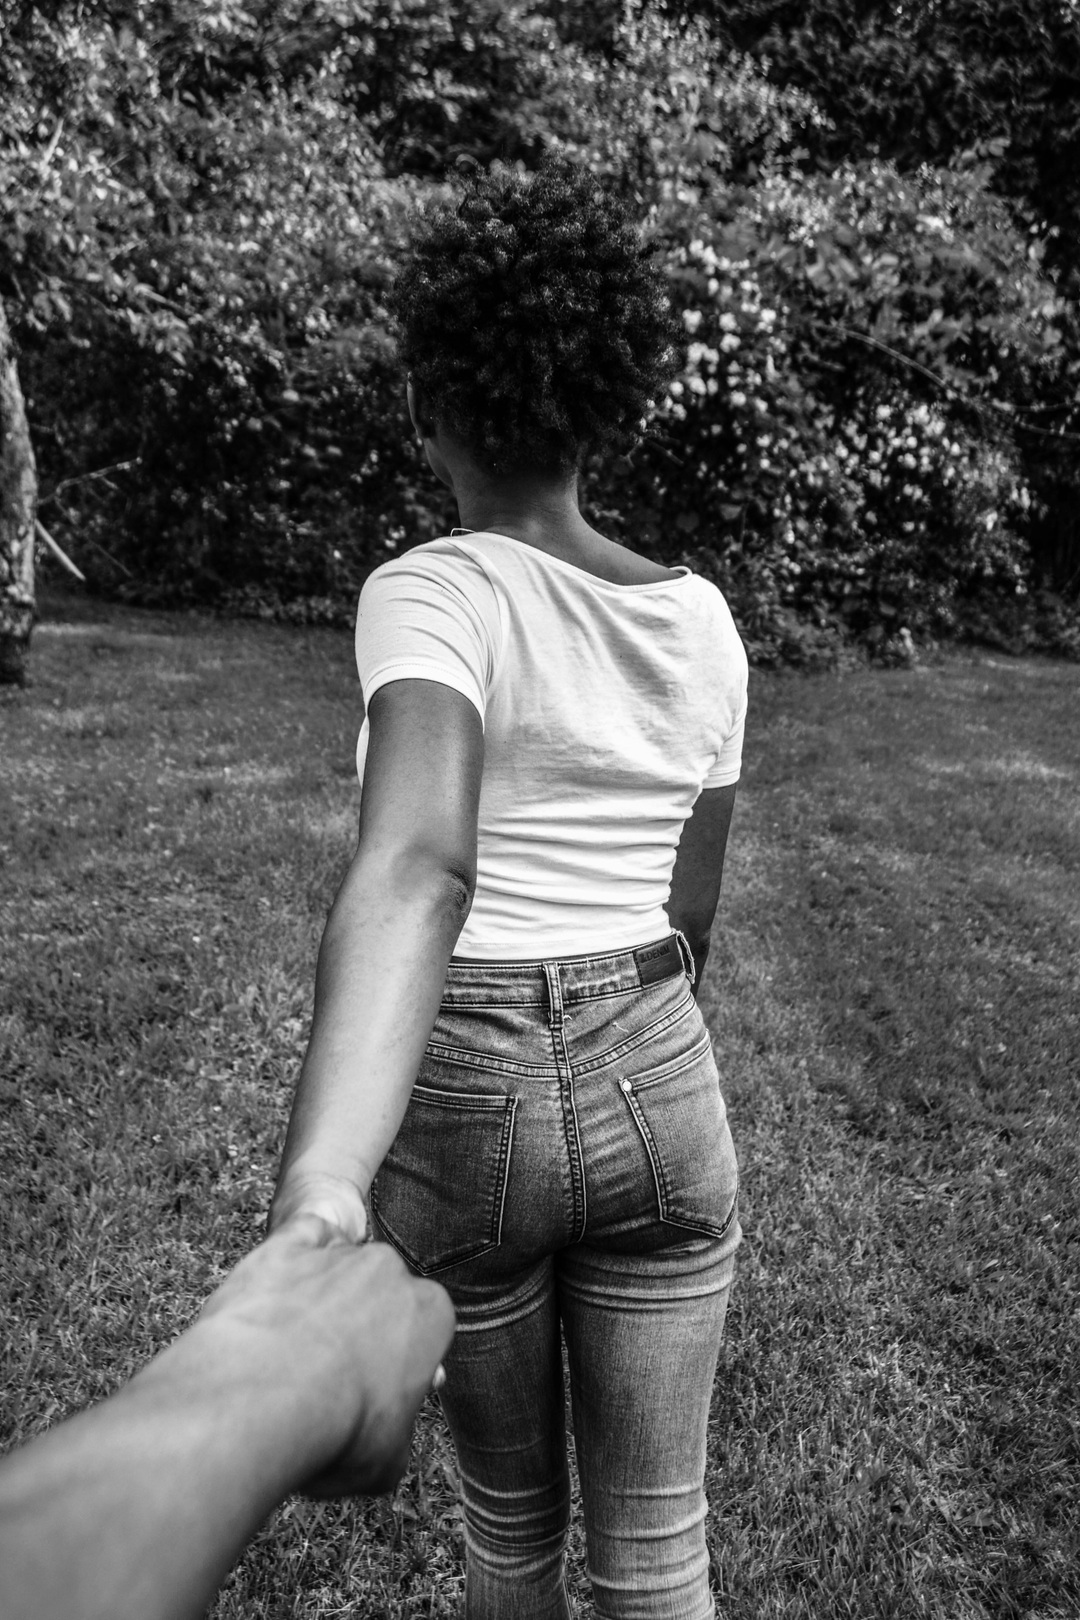 black woman leading her man by the hand